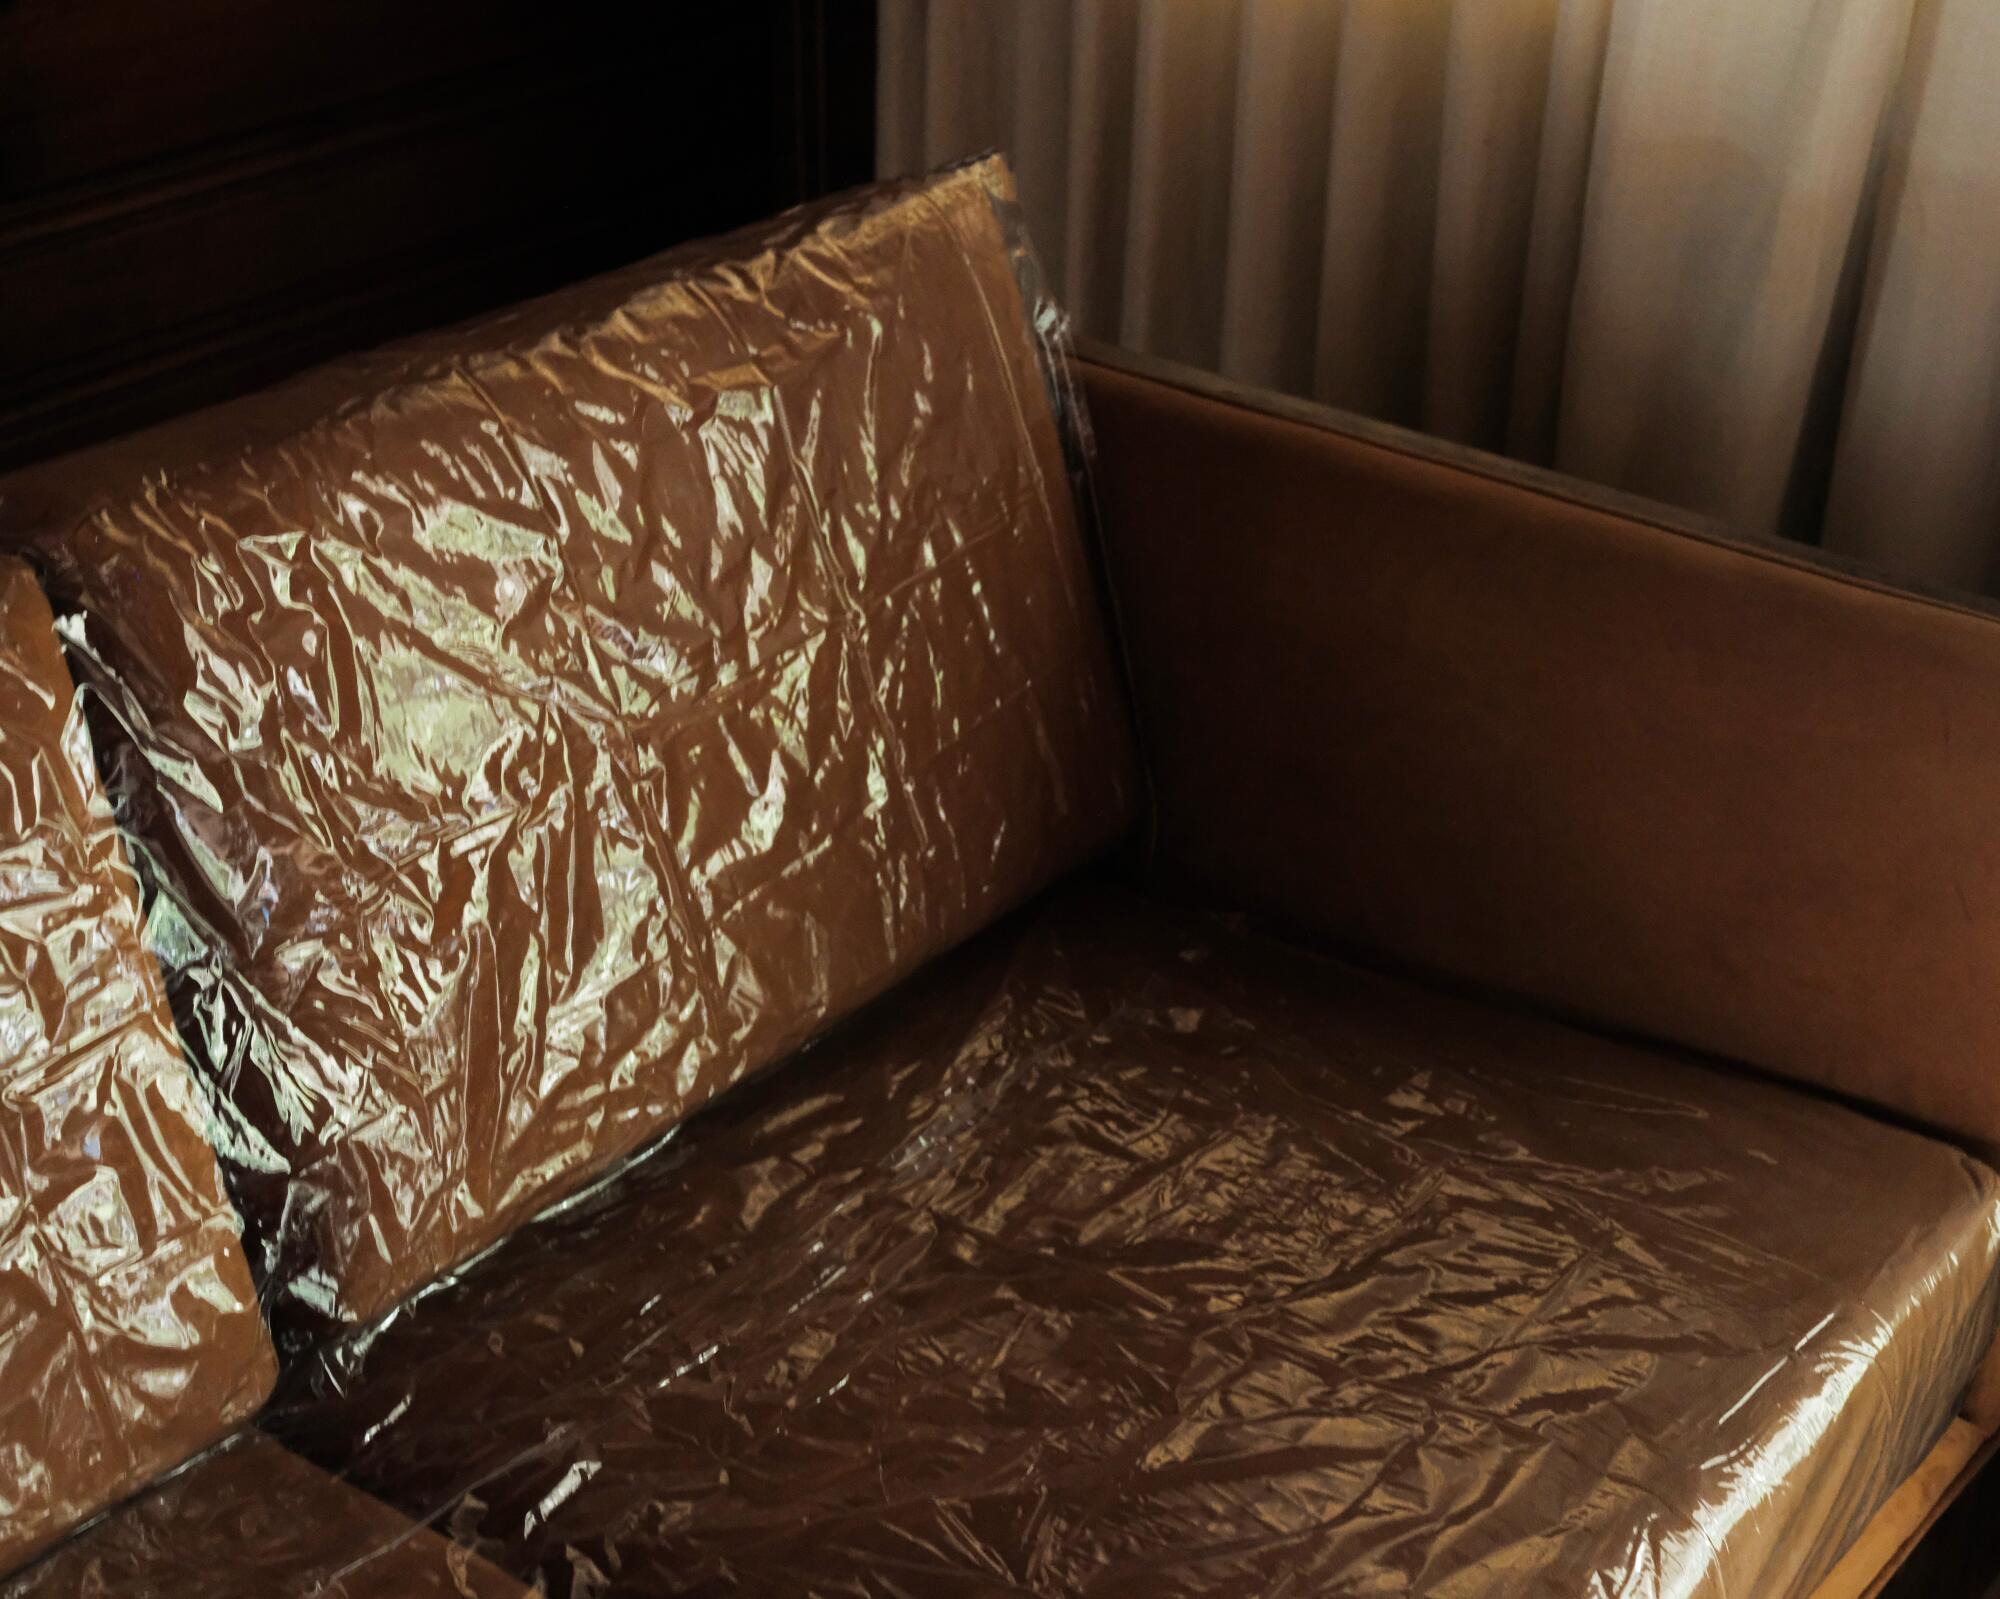 A close-up photo of a plastic-covered couch, the light hitting the wrinkles.